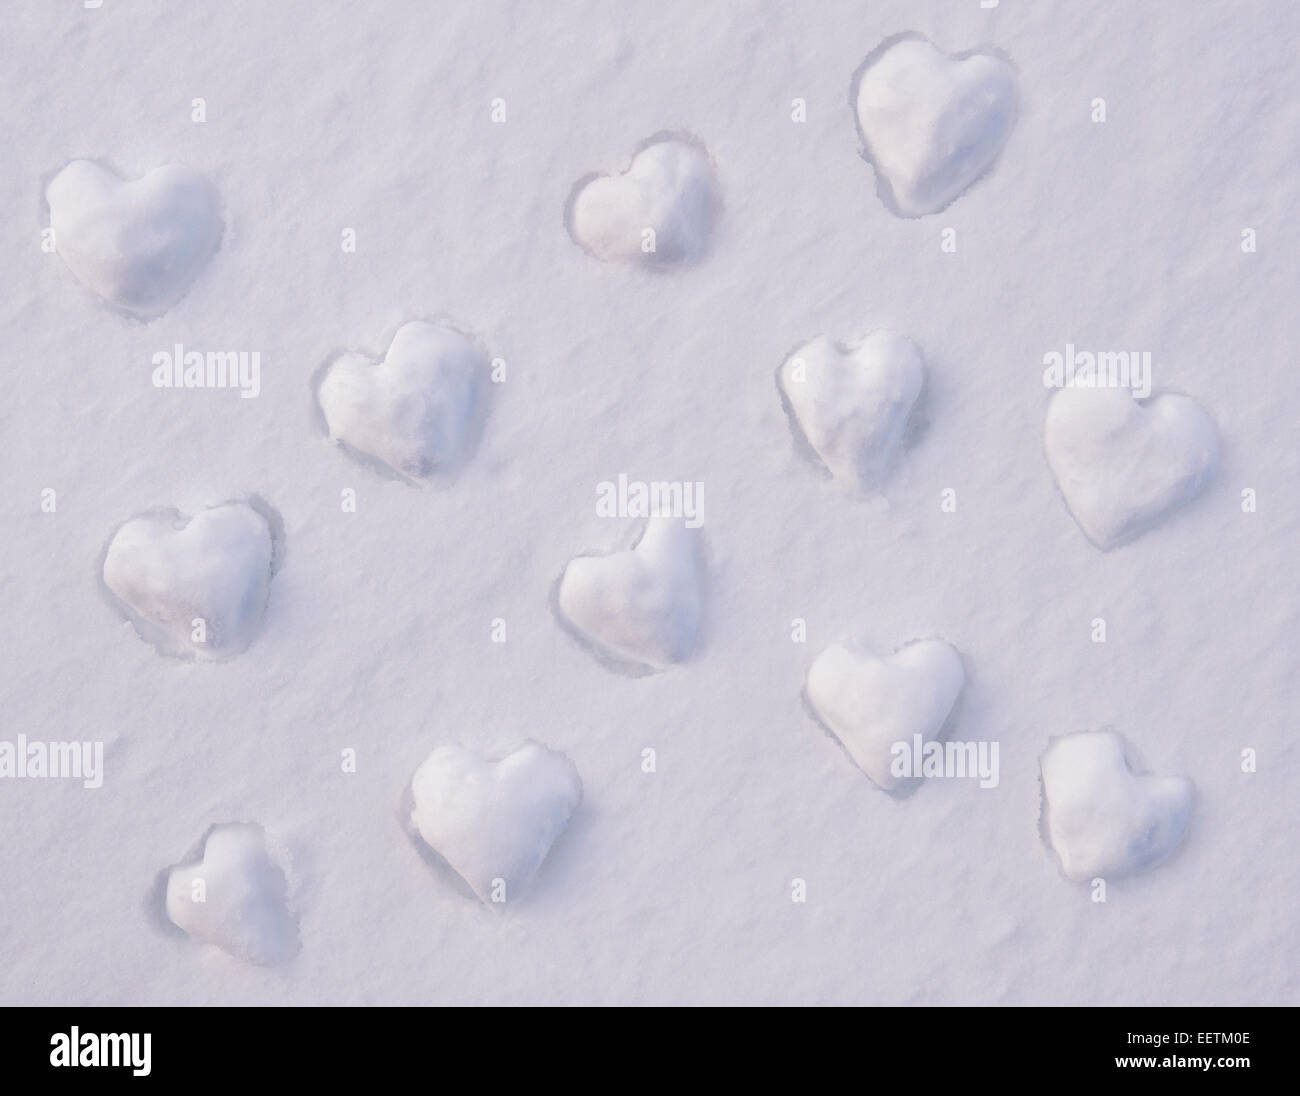 Love heart shapes in the snow Stock Photo